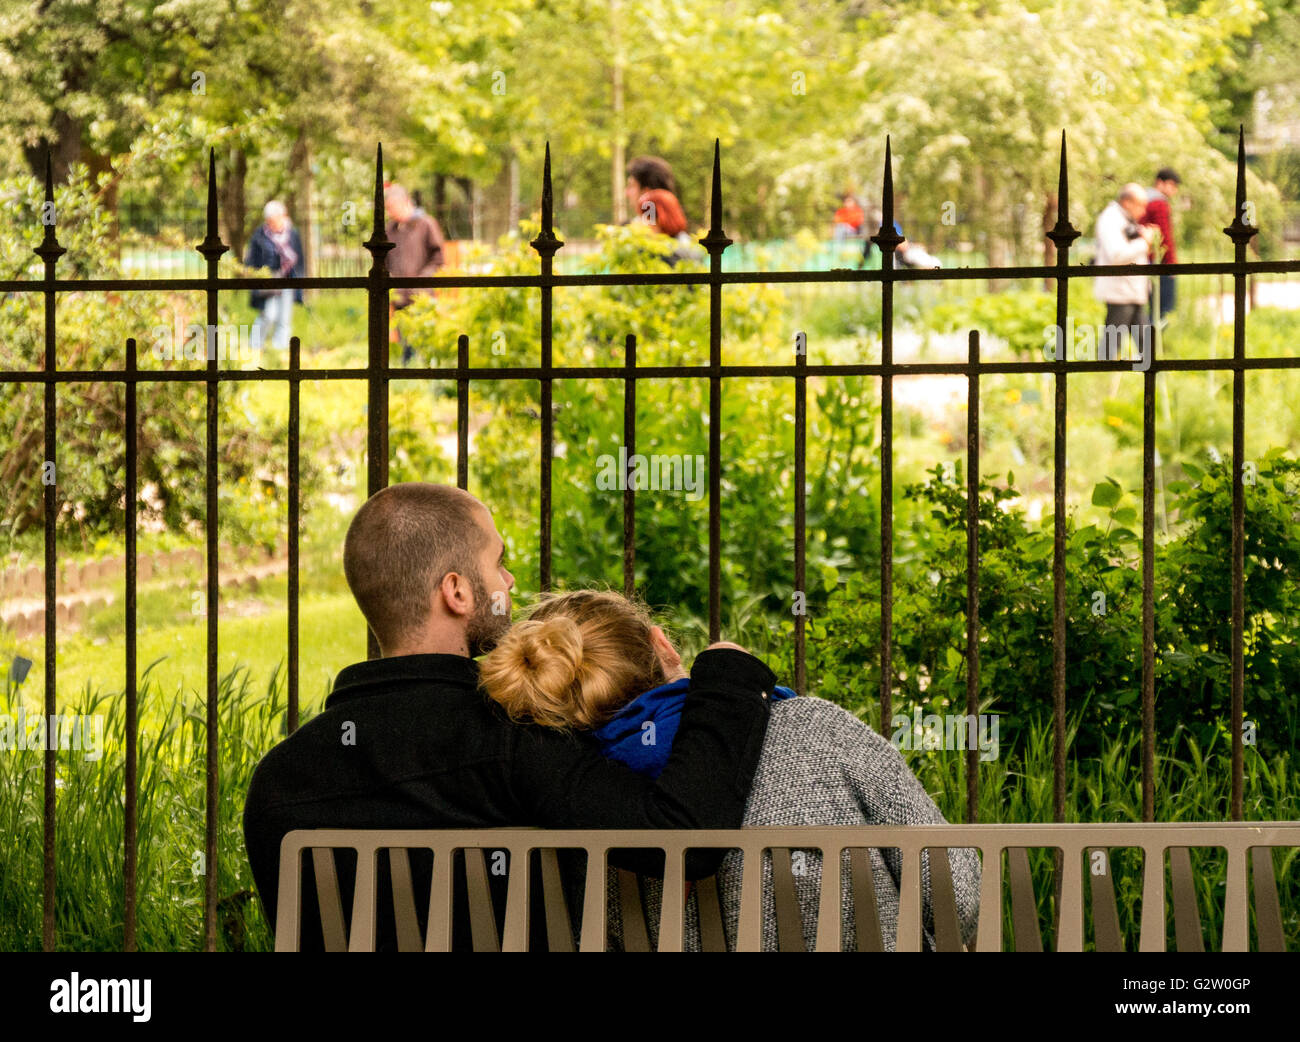 A couple on a bench hugging in front of a public garden and a railing Stock Photo